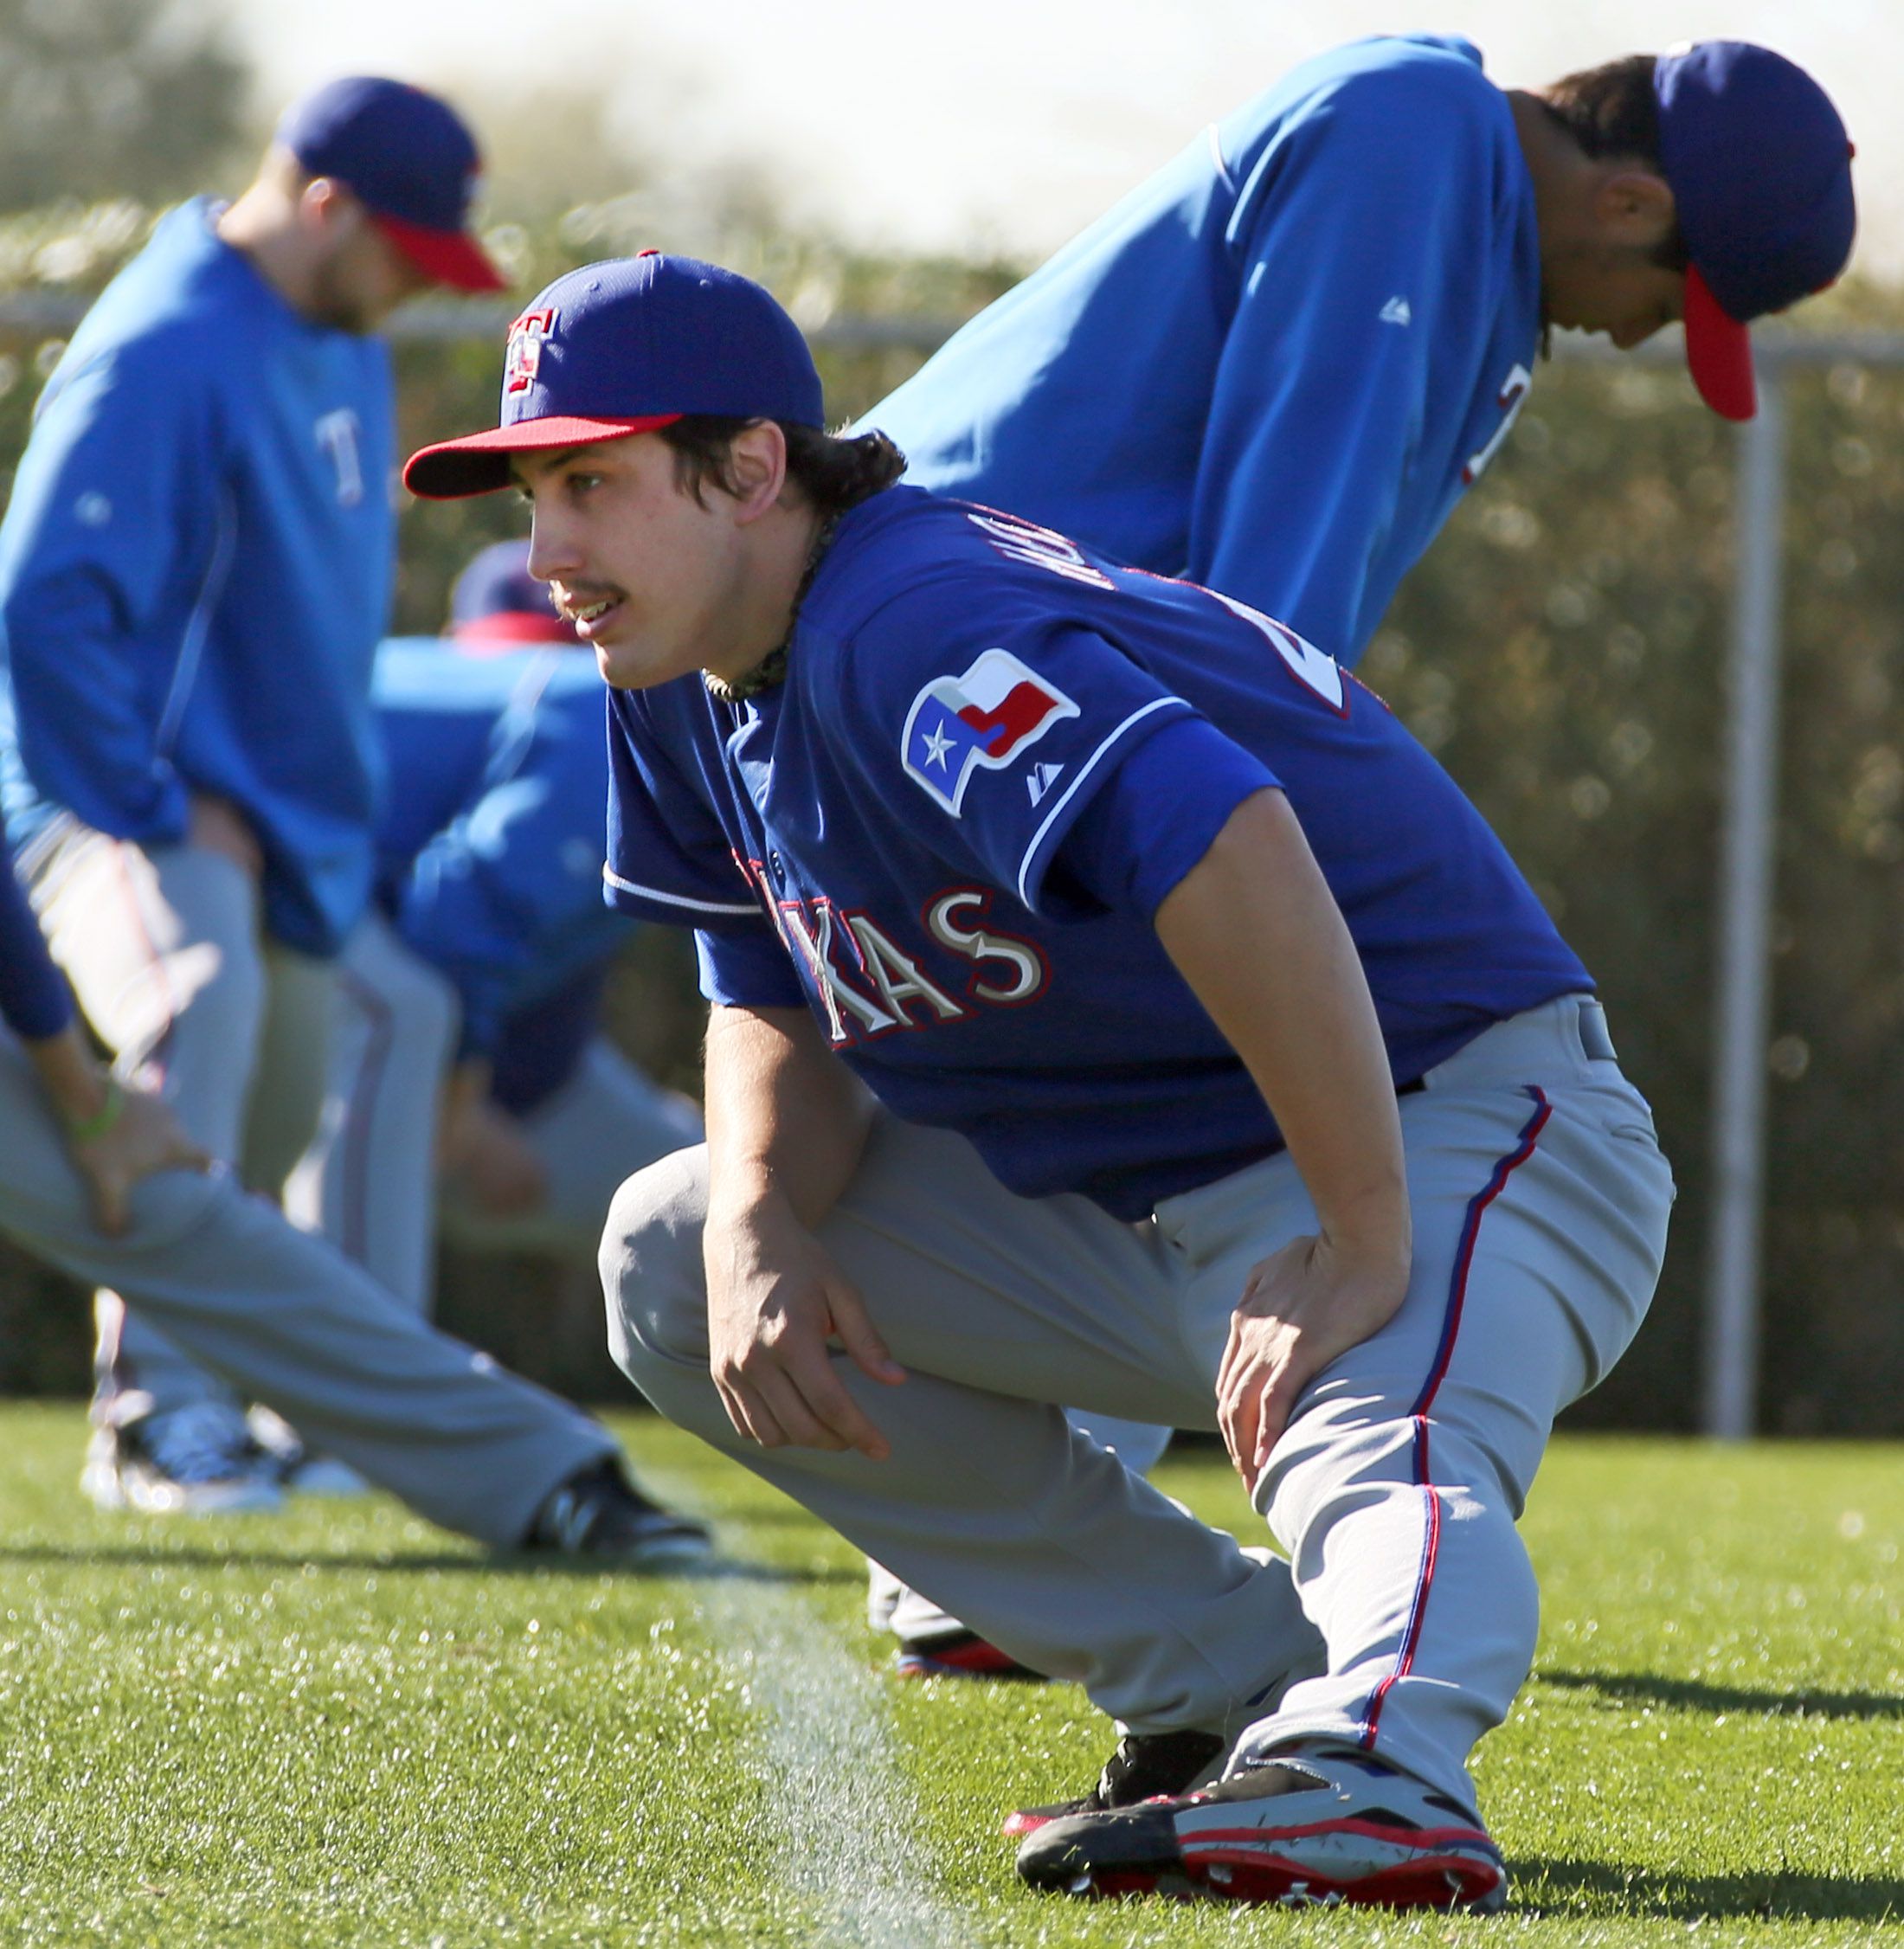 10 things you might not know about Derek Holland, including that